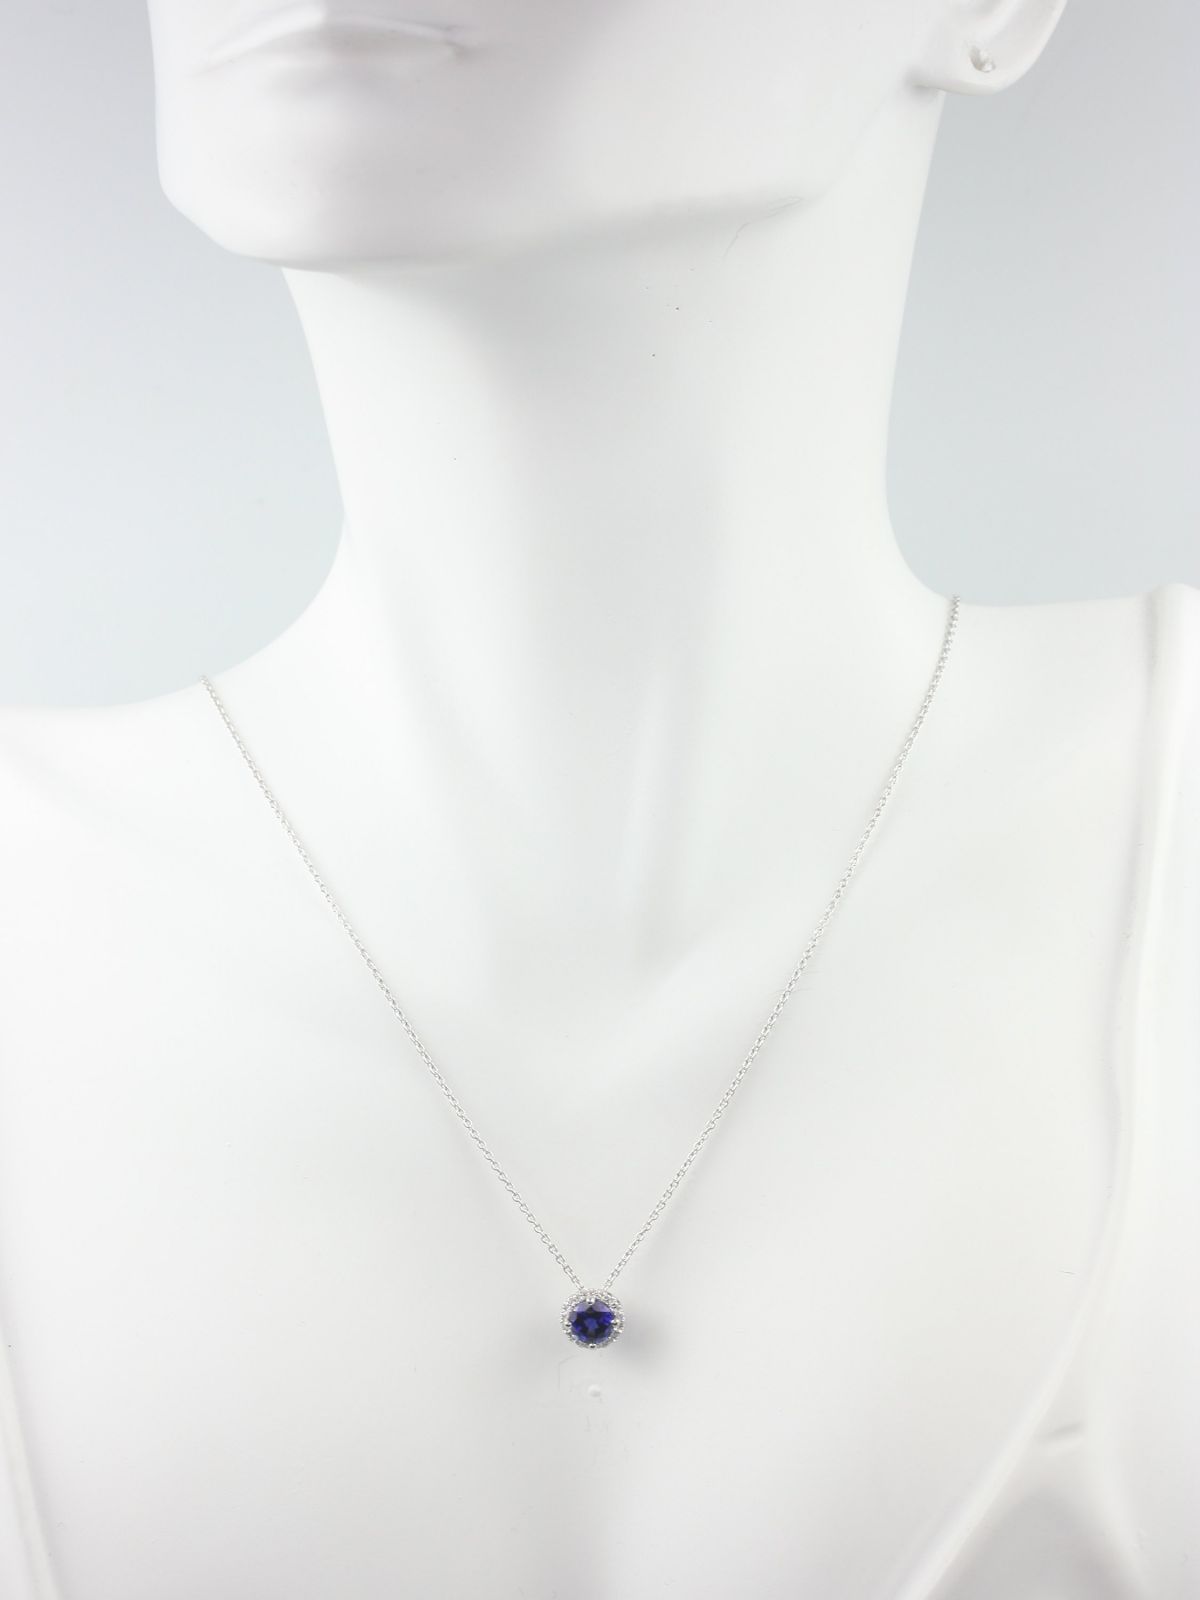 Rosados Box Gemma 5mm 14kt White Gold Round Blue Sapphire and Diamonds Halo Floating Necklace